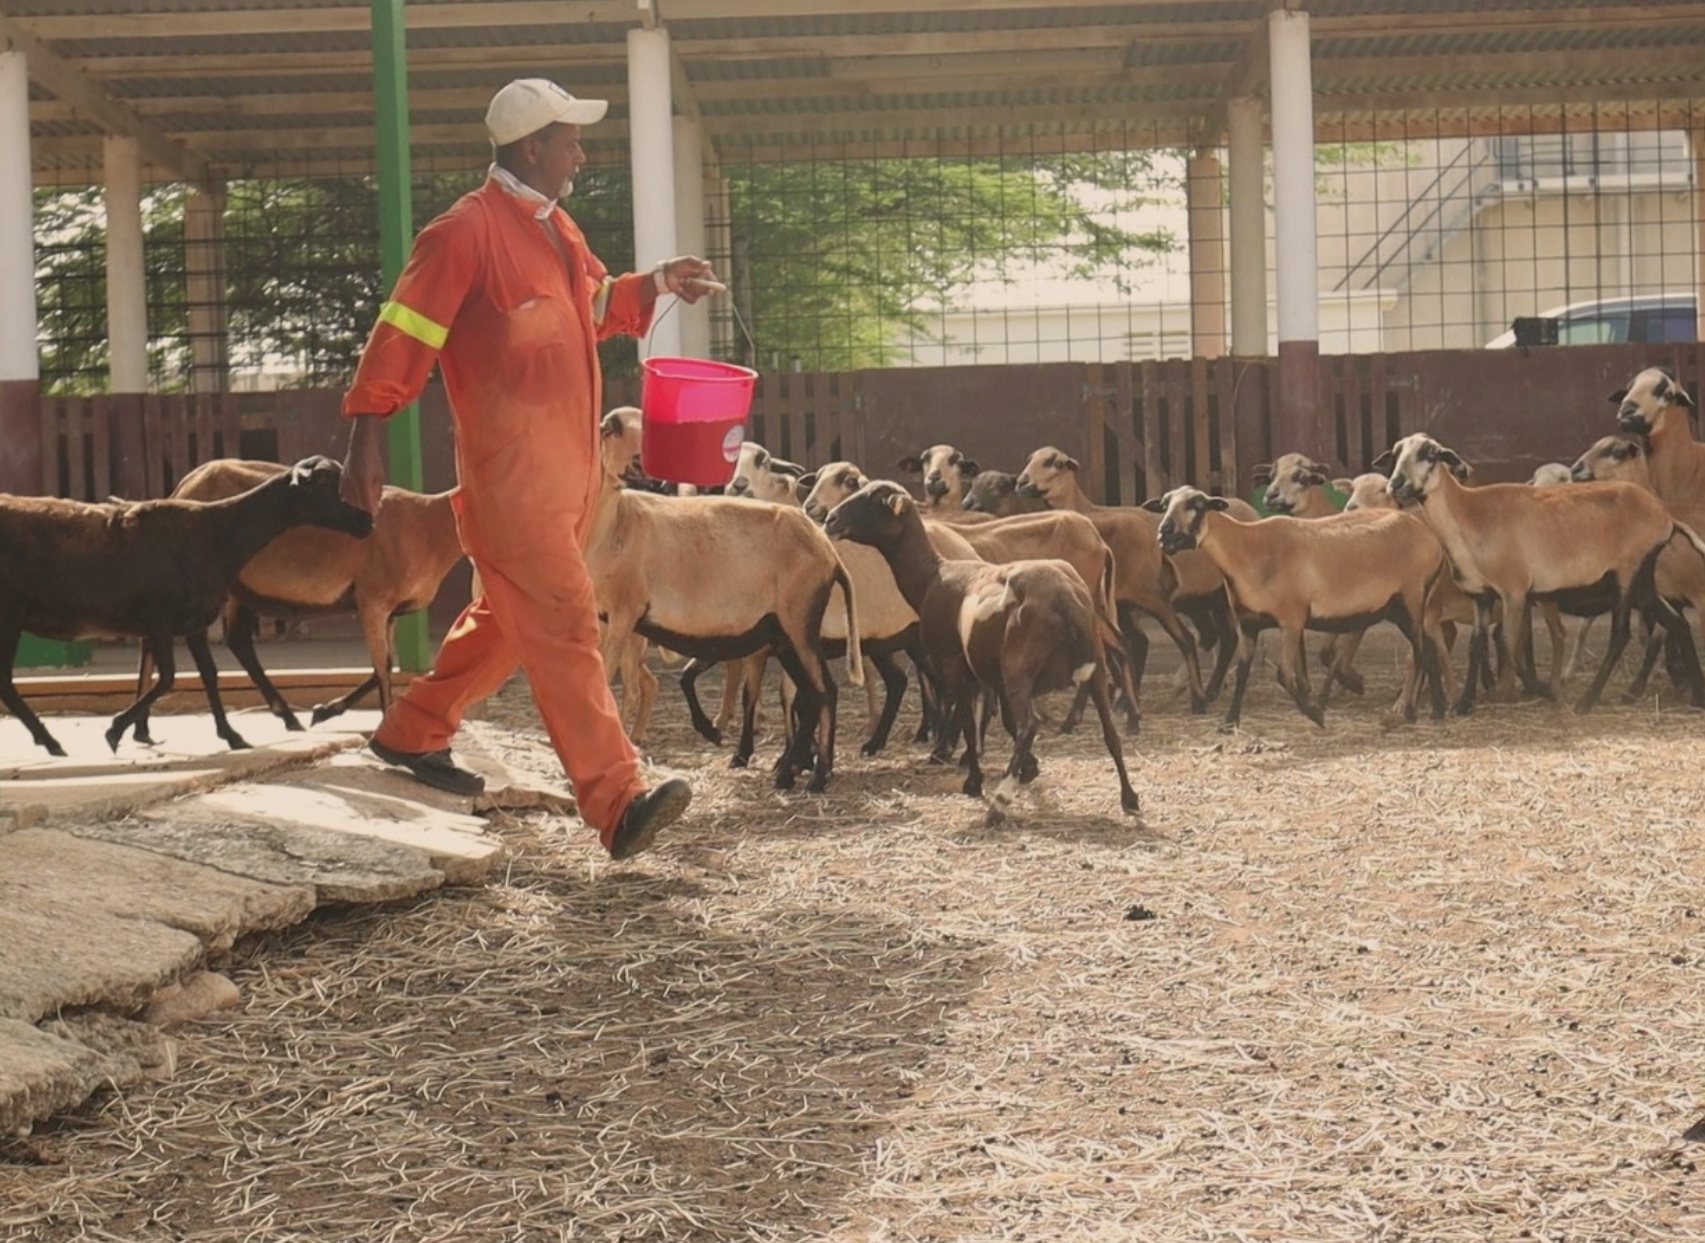 LVV with Info Session on Professional Goat Farming